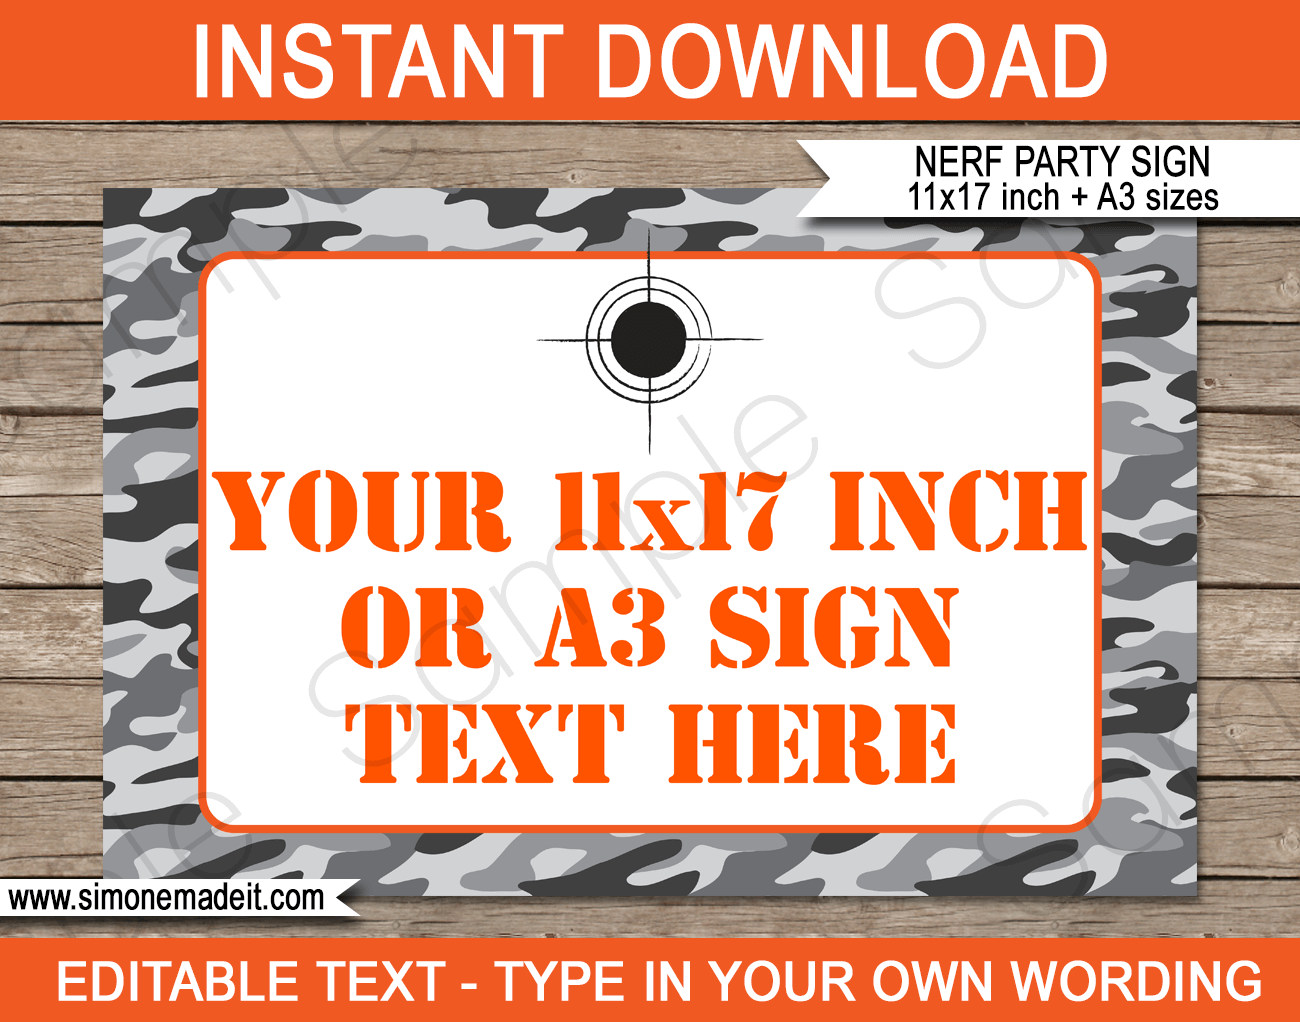 Nerf Party Signs | Editable & Printable DIY Templates | Birthday Party Decorations | Tabloid / Ledger 11x17 inches | A3 | $4.00 Instant Download via SIMONEmadeit.com